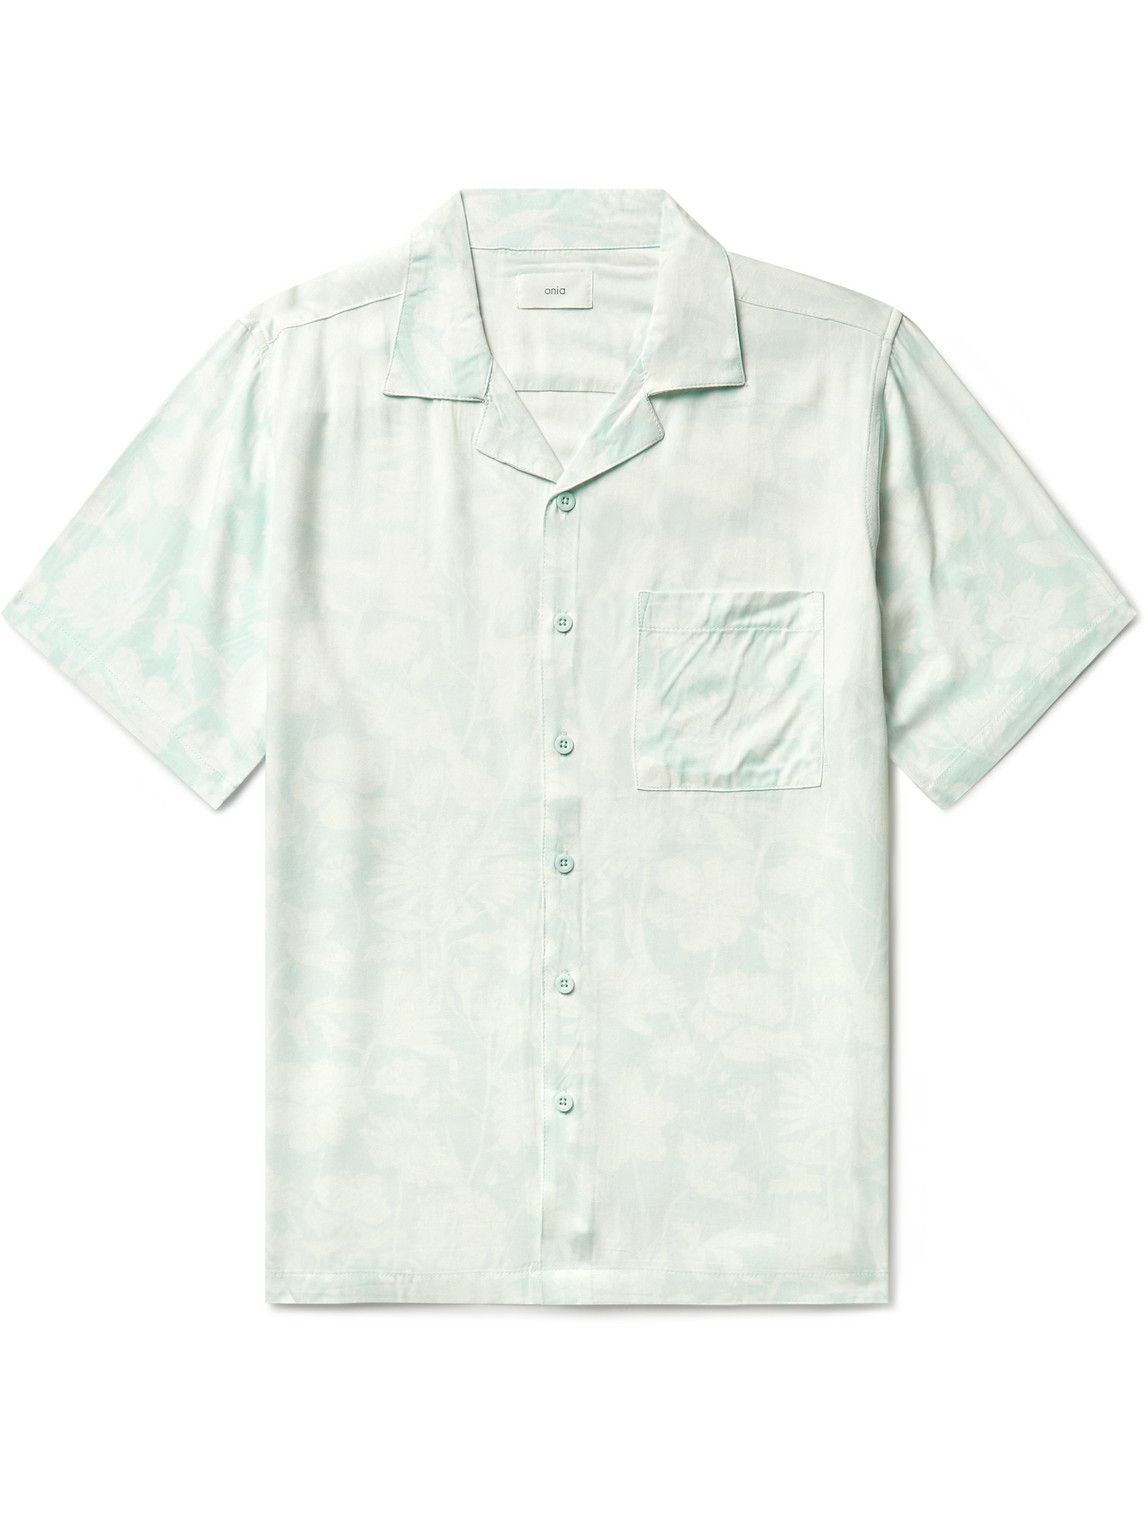 Onia - Vacation Camp-Collar Floral-Print Twill Shirt - Blue Onia